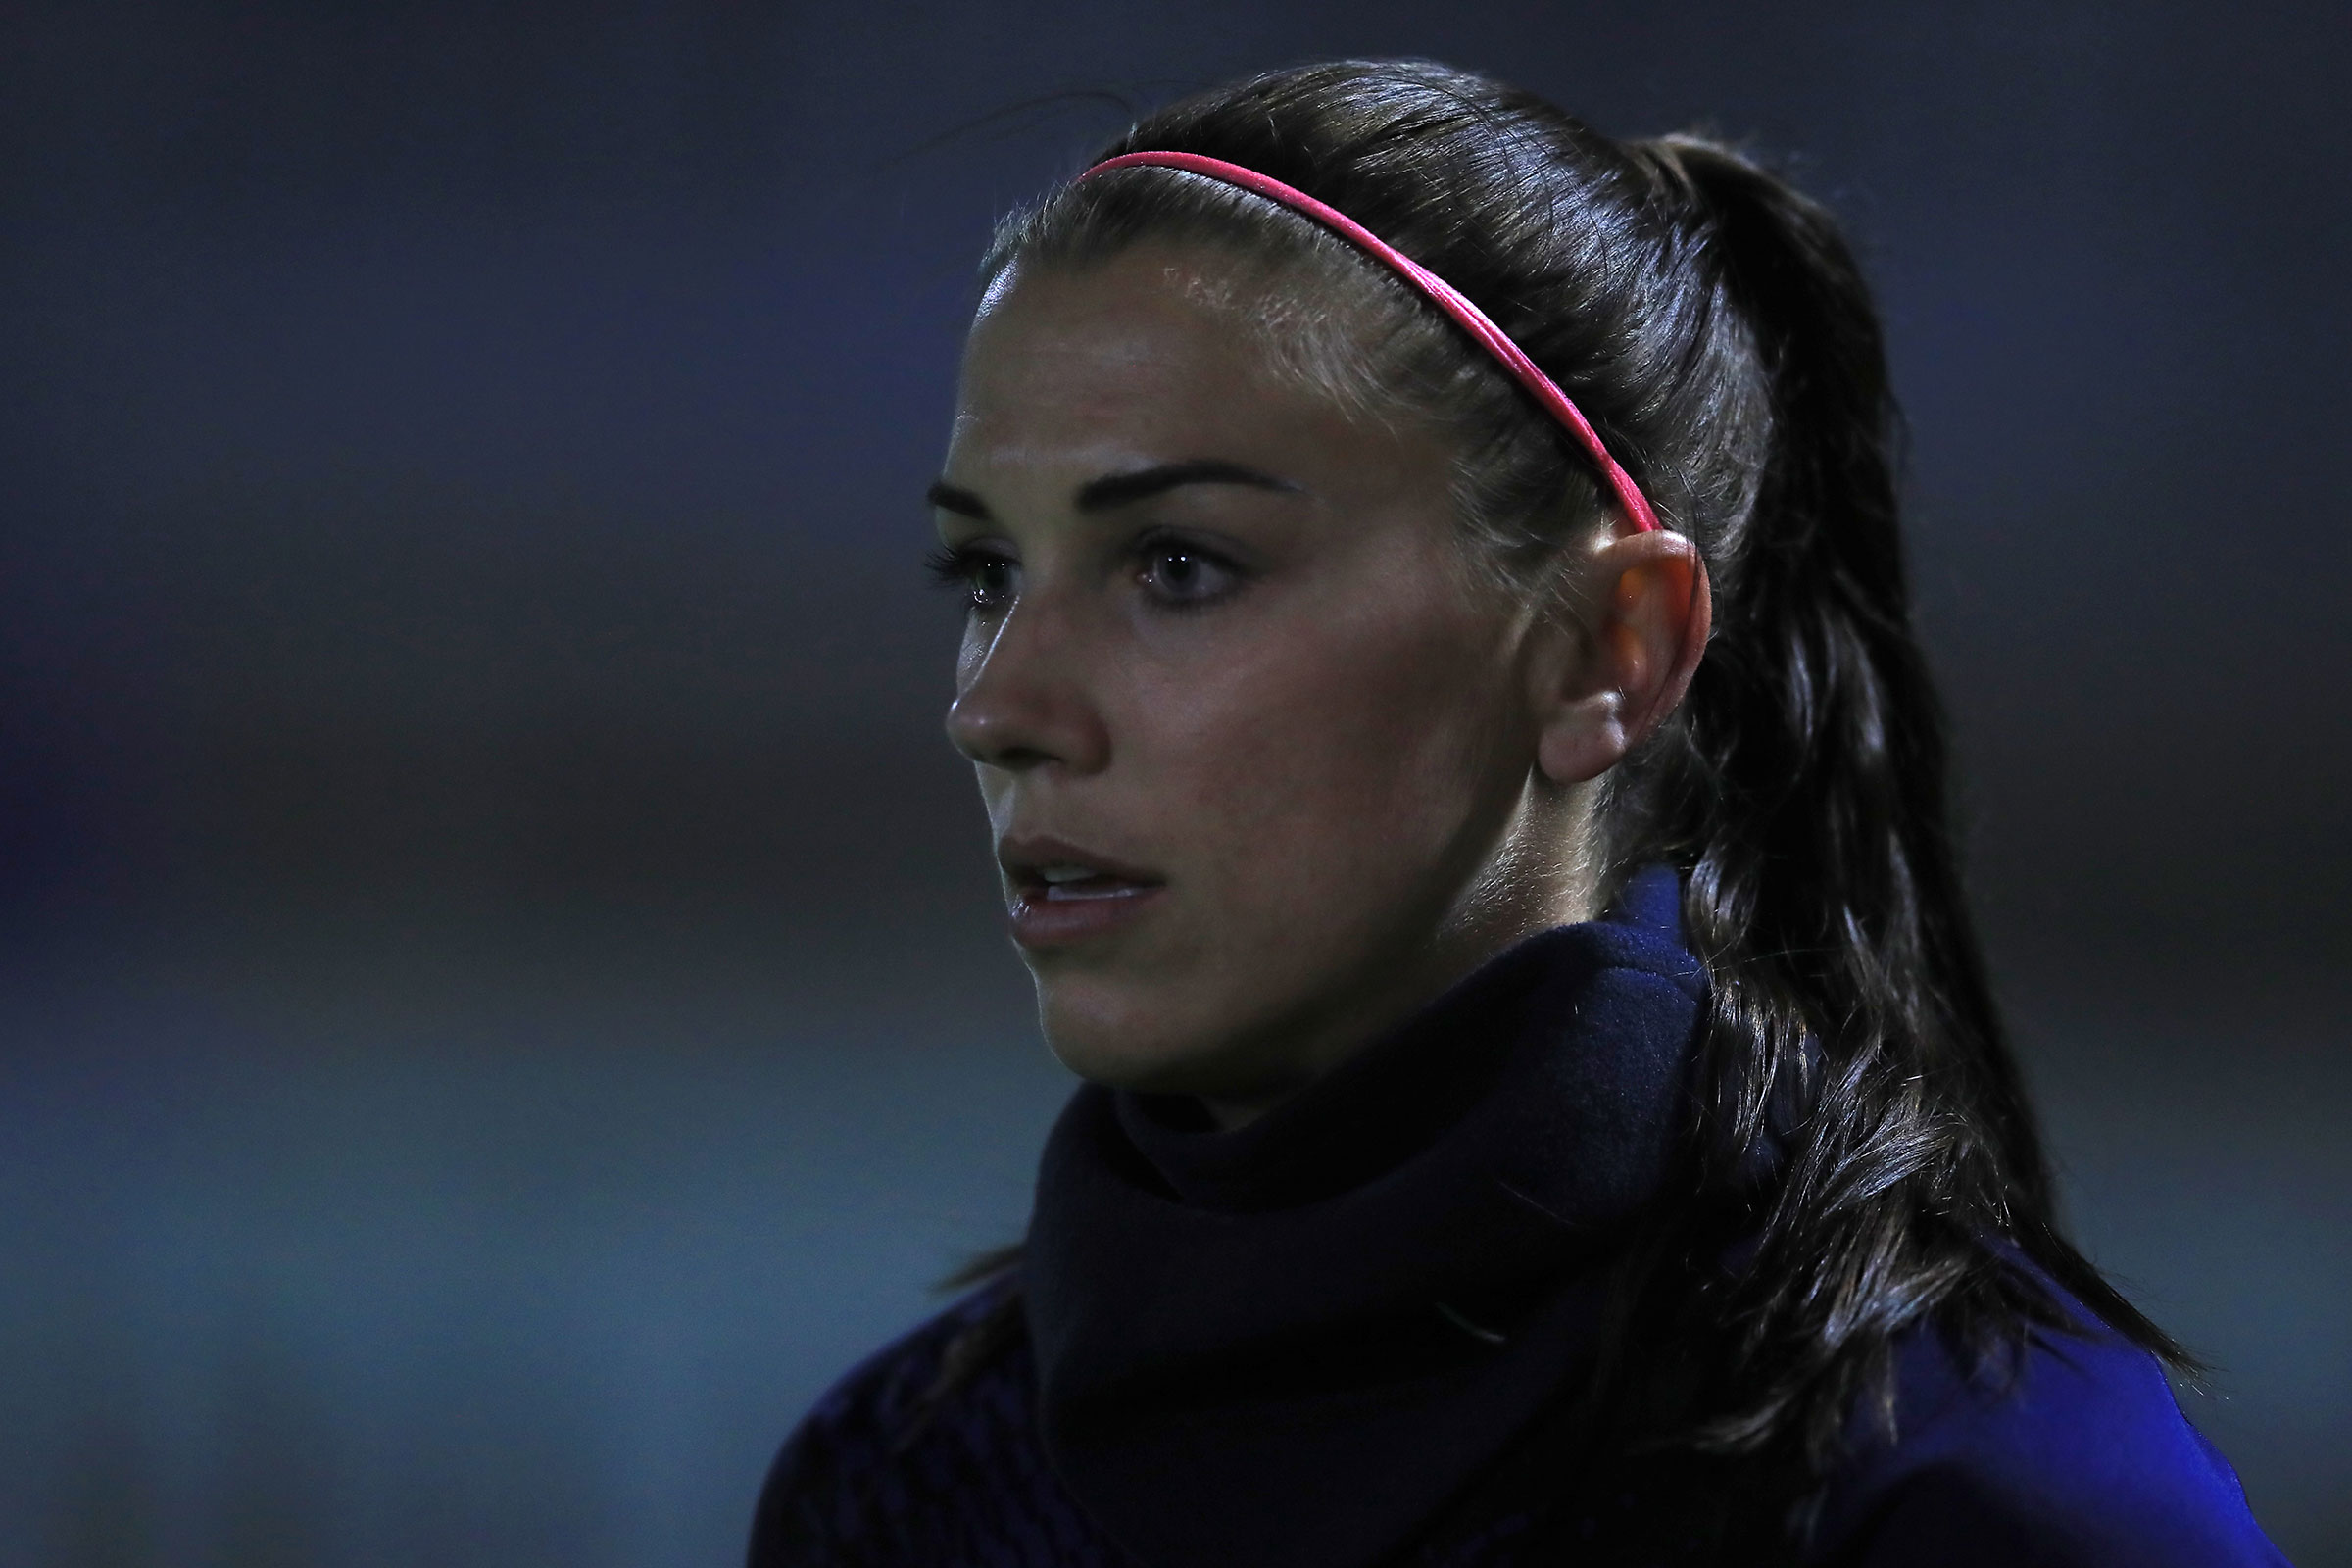 Tottenham Hotspur's Alex Morgan warming up before the Continental Cup match at Meadow Park, London. (Adam Davy—PA Images/Getty Images)